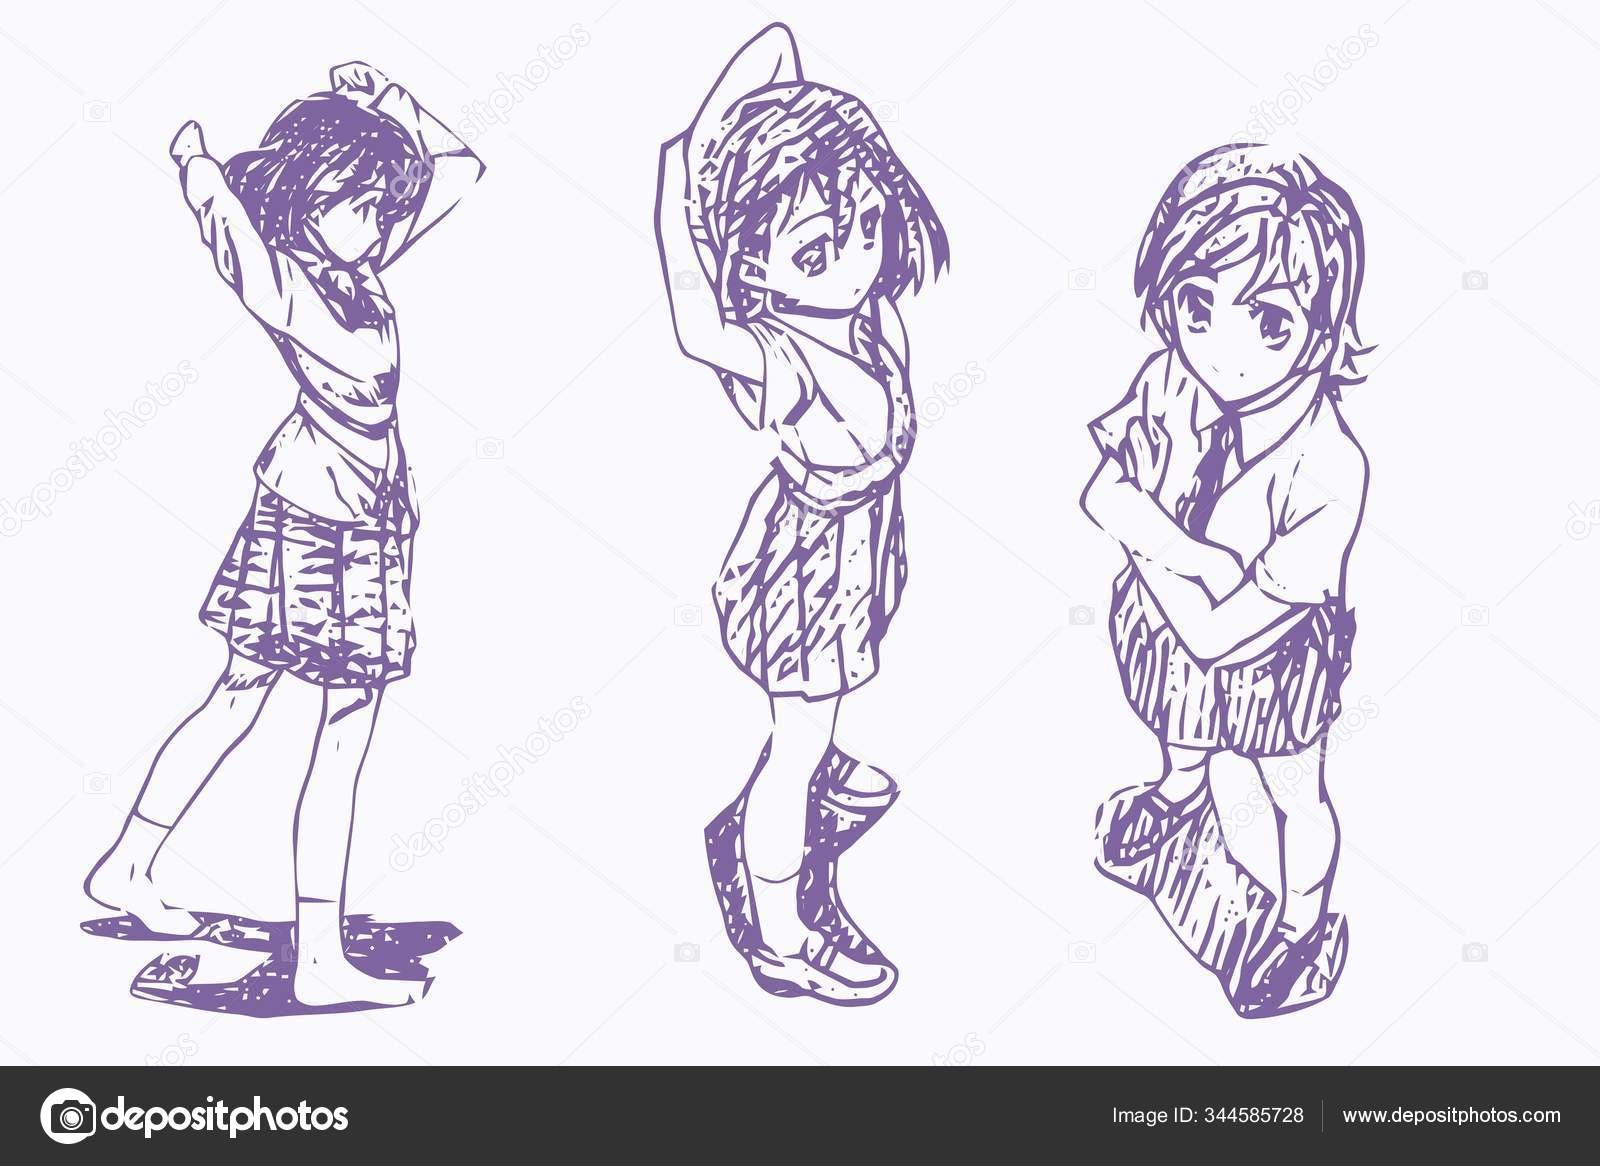 Anime girl poses - 70 Images to sketch